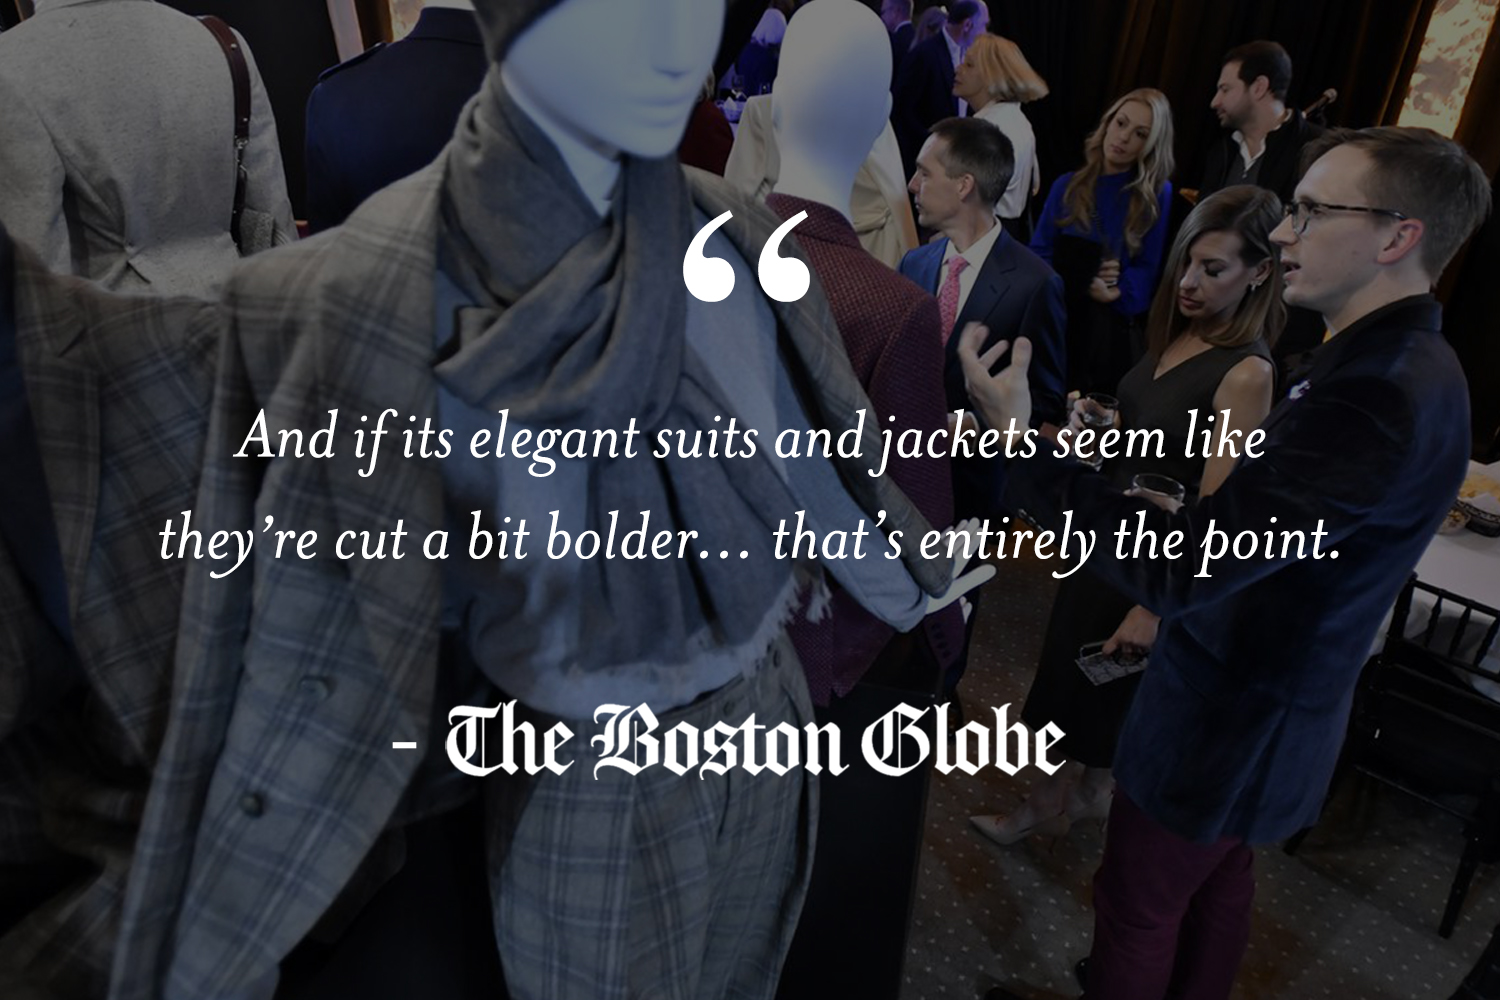 A quote that says " And if its elegant suits and jackets seem like they're cut a bit bolder... that's entirely the point" by Boston Globe Breaks The Sidney Story